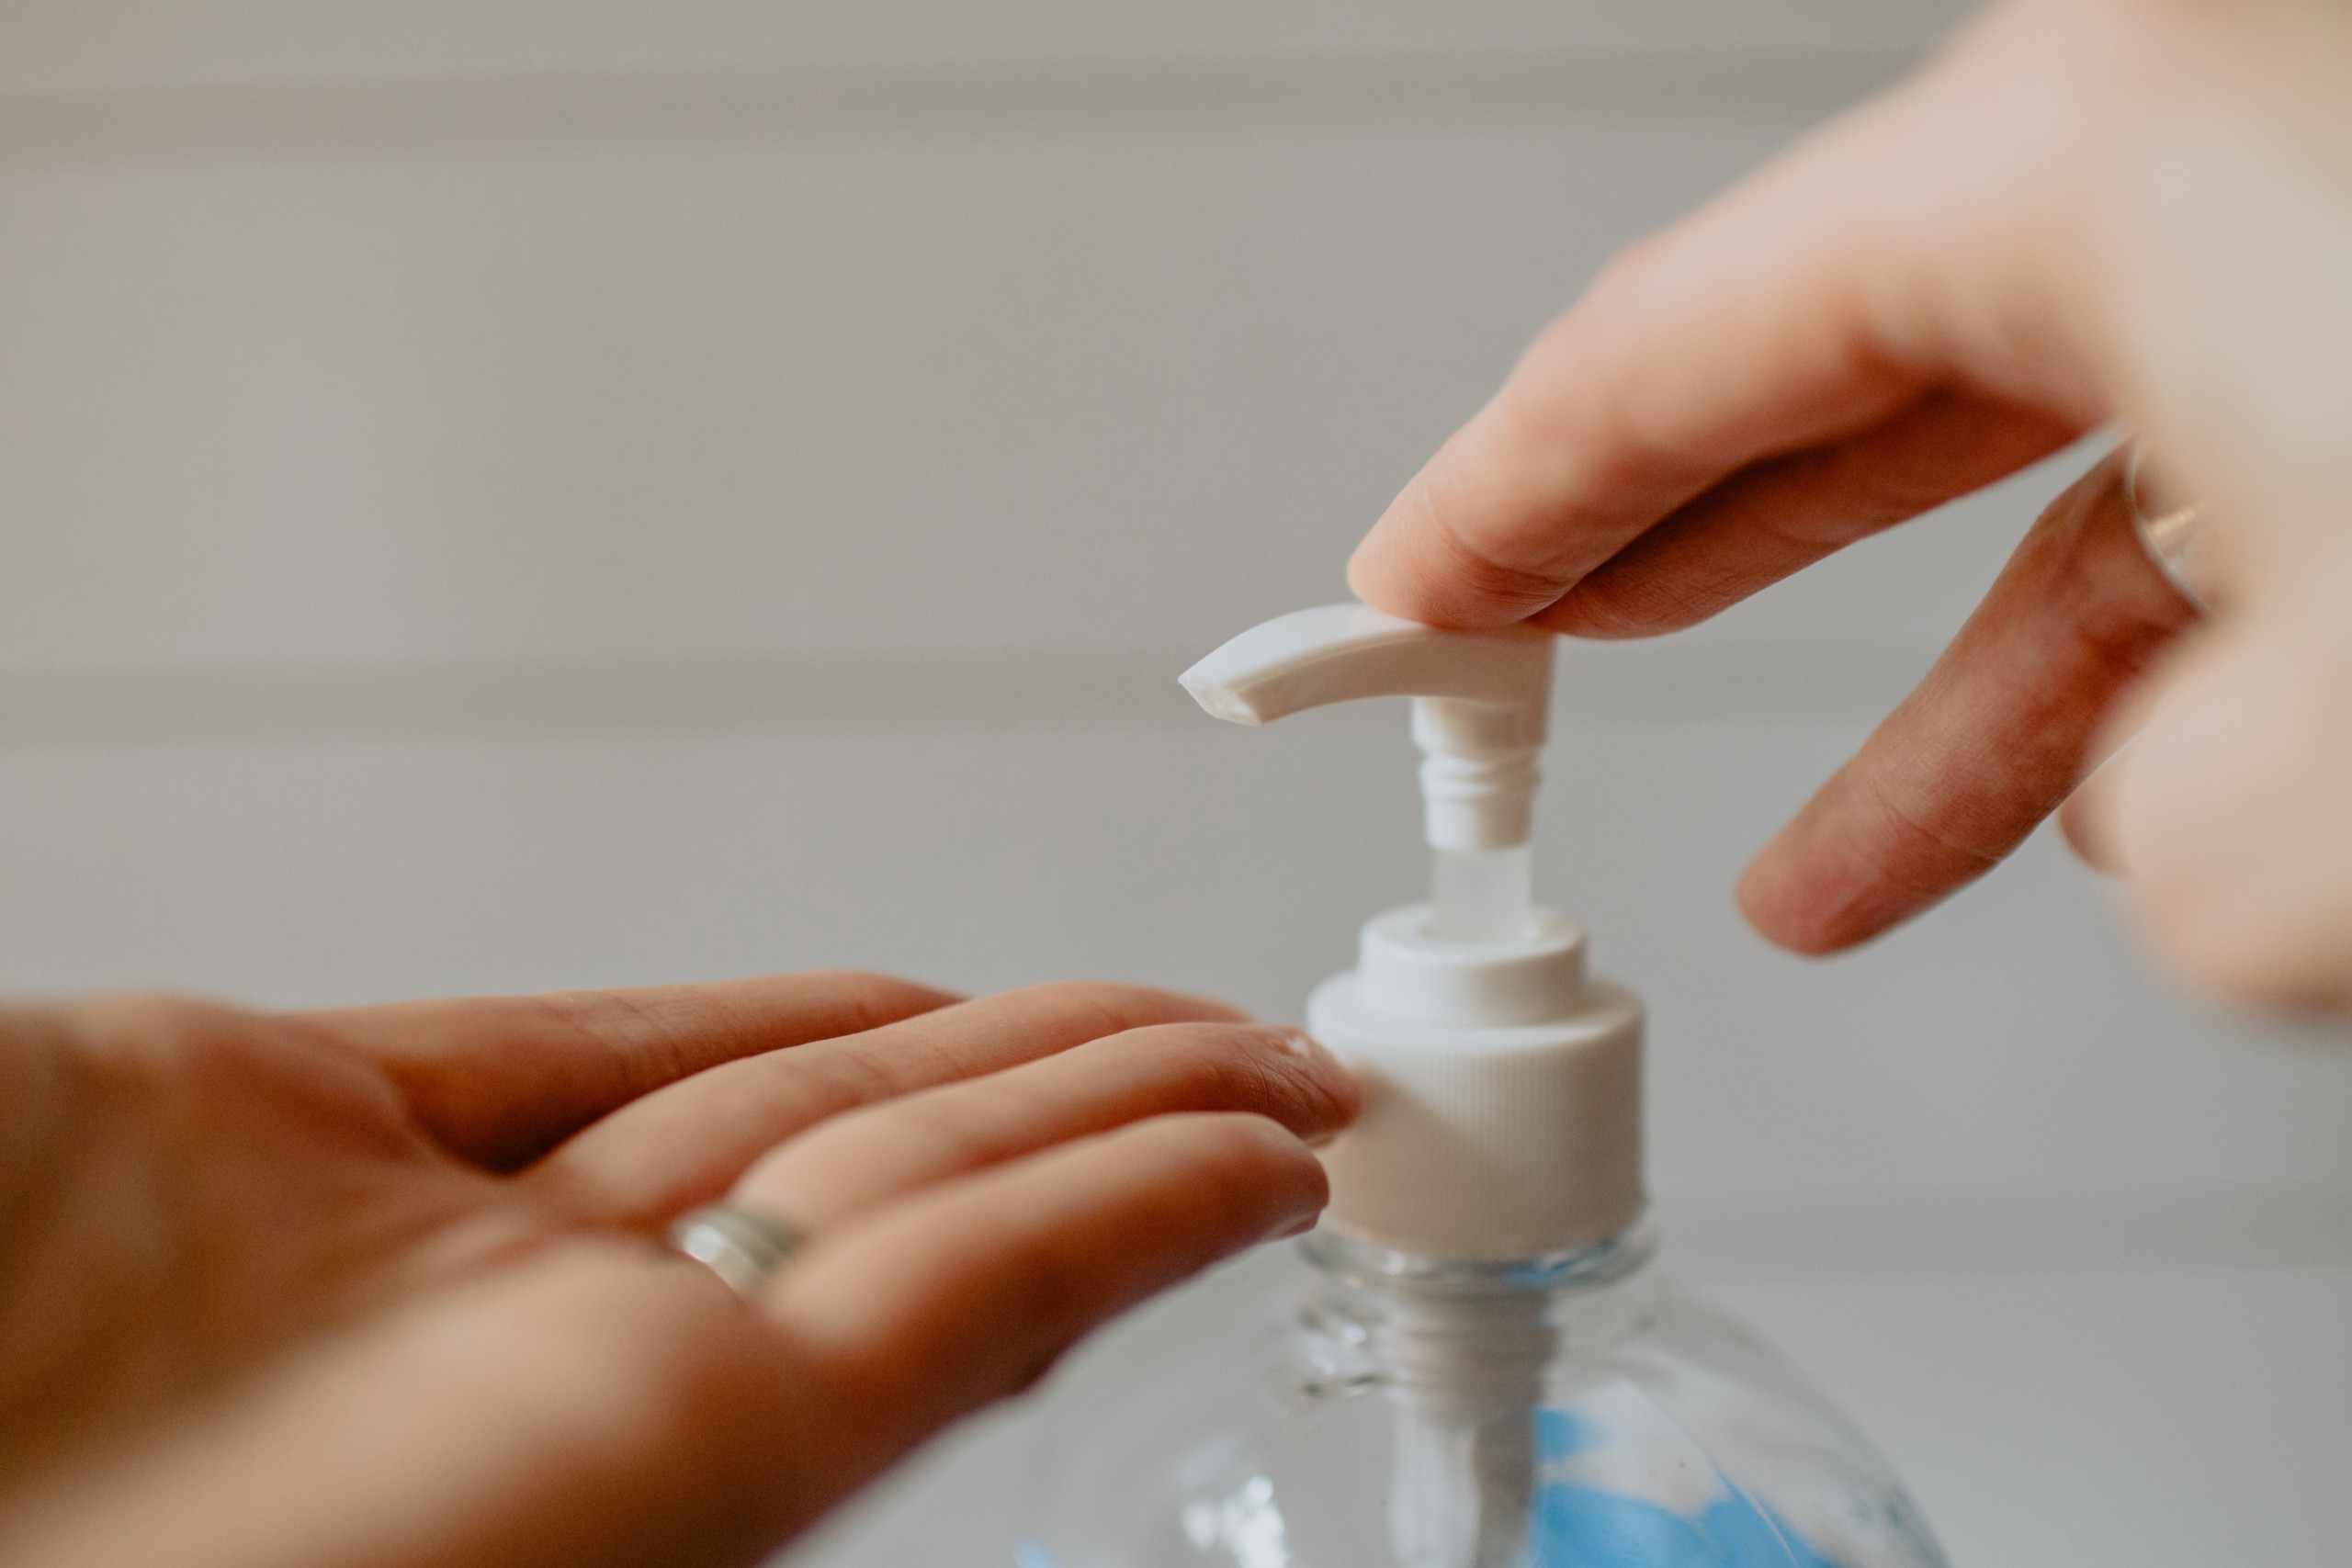 Hands and hand sanitizer pump. Photo by Kelly Sikkema from Unsplash.com